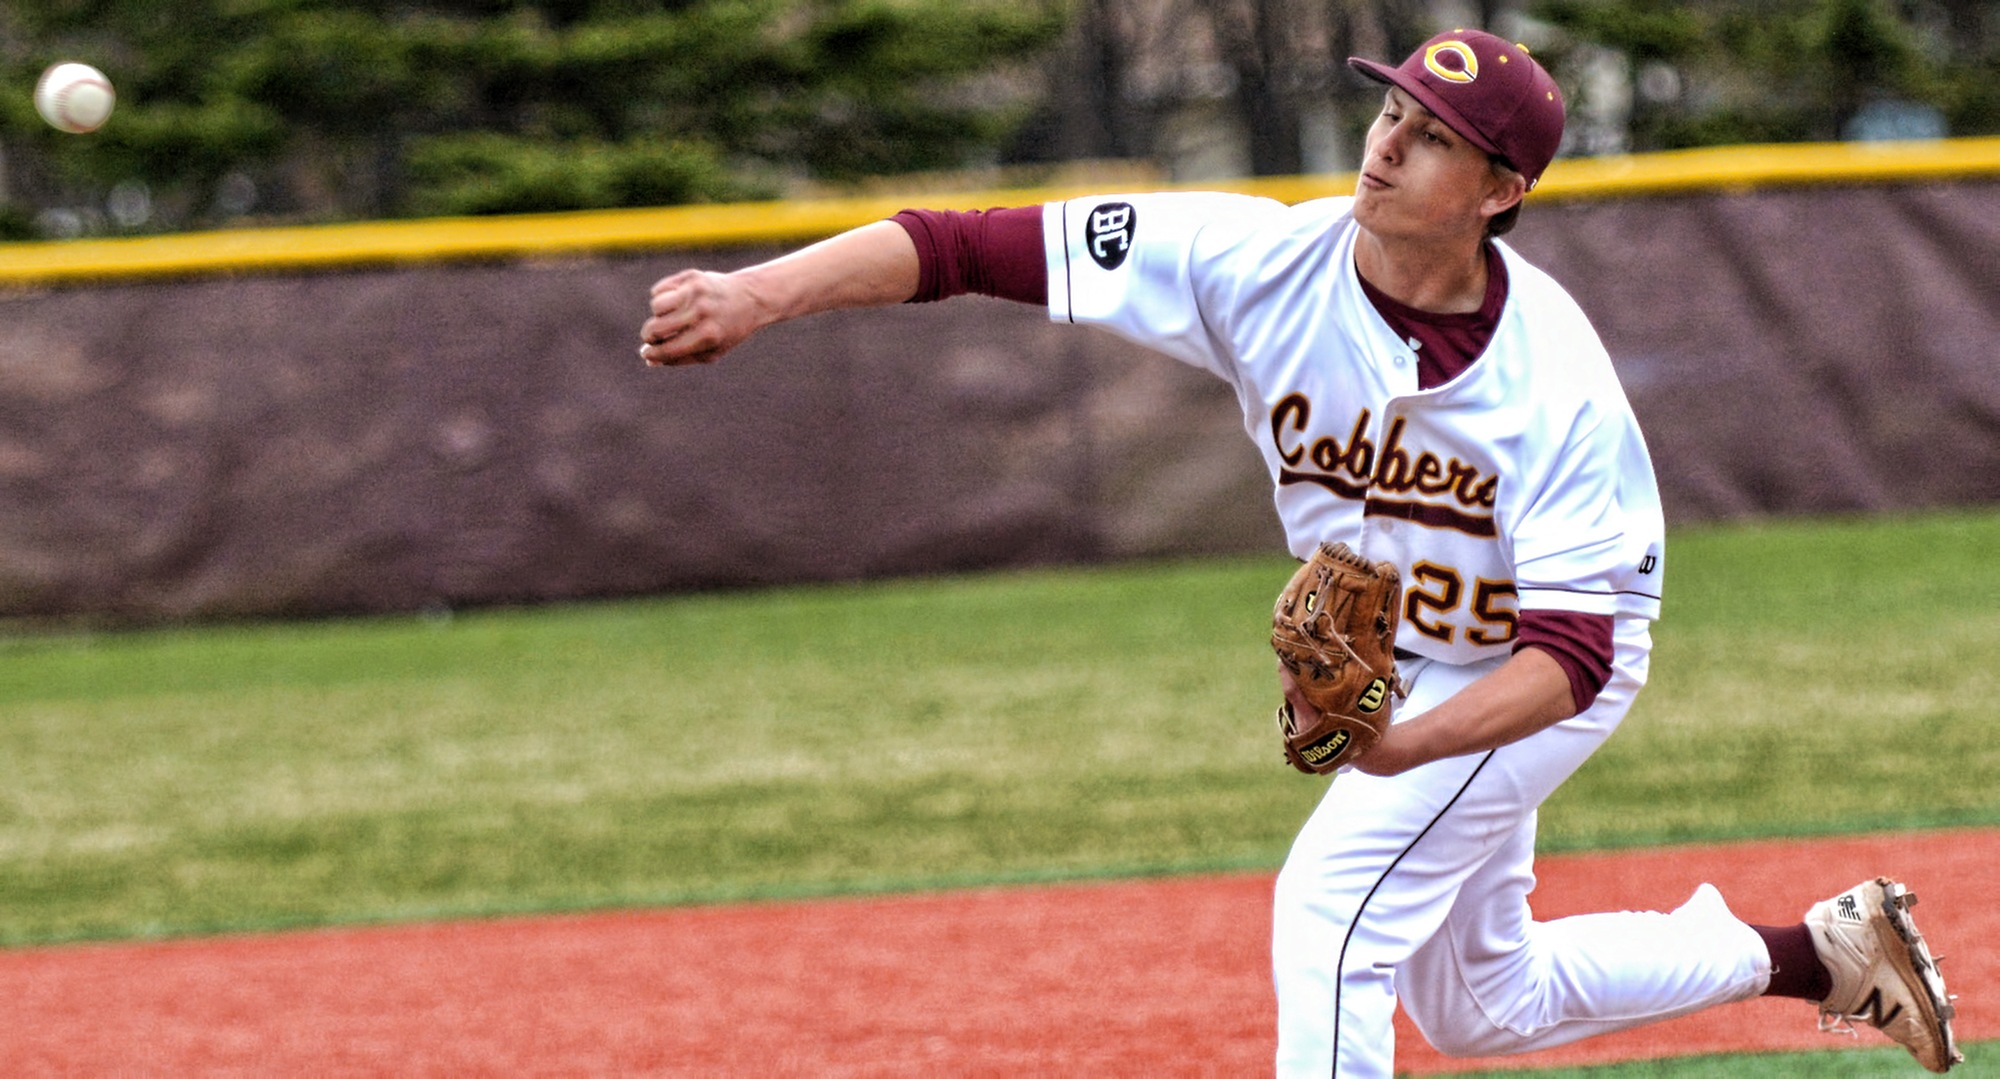 Sophomore Alex Erickson was one of four Cobber pitcher who limited Dominican to only two earned runs and five hits in their game against Dominican.